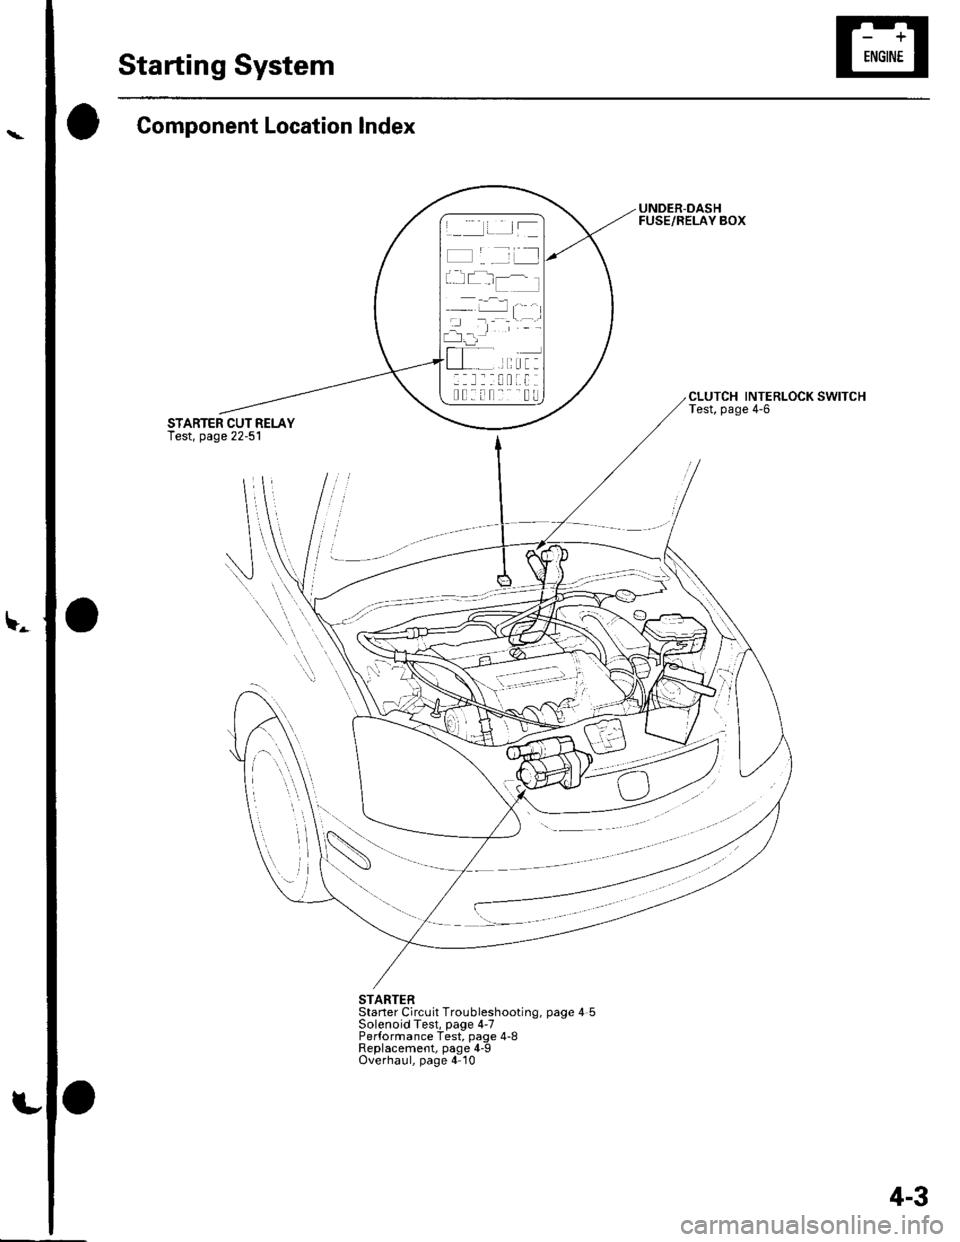 HONDA CIVIC 2003 7.G Workshop Manual \-
Starting System
Component Location Index
UNDER-DASHFUSE/RELAY BOX
CLUTCH INTERLOCK SWITCHTest, page 4-6
STARTERStaner Circuit Troubleshoot,ng, page 4 5Solenoid Test, page 4-7Performance Test, page 